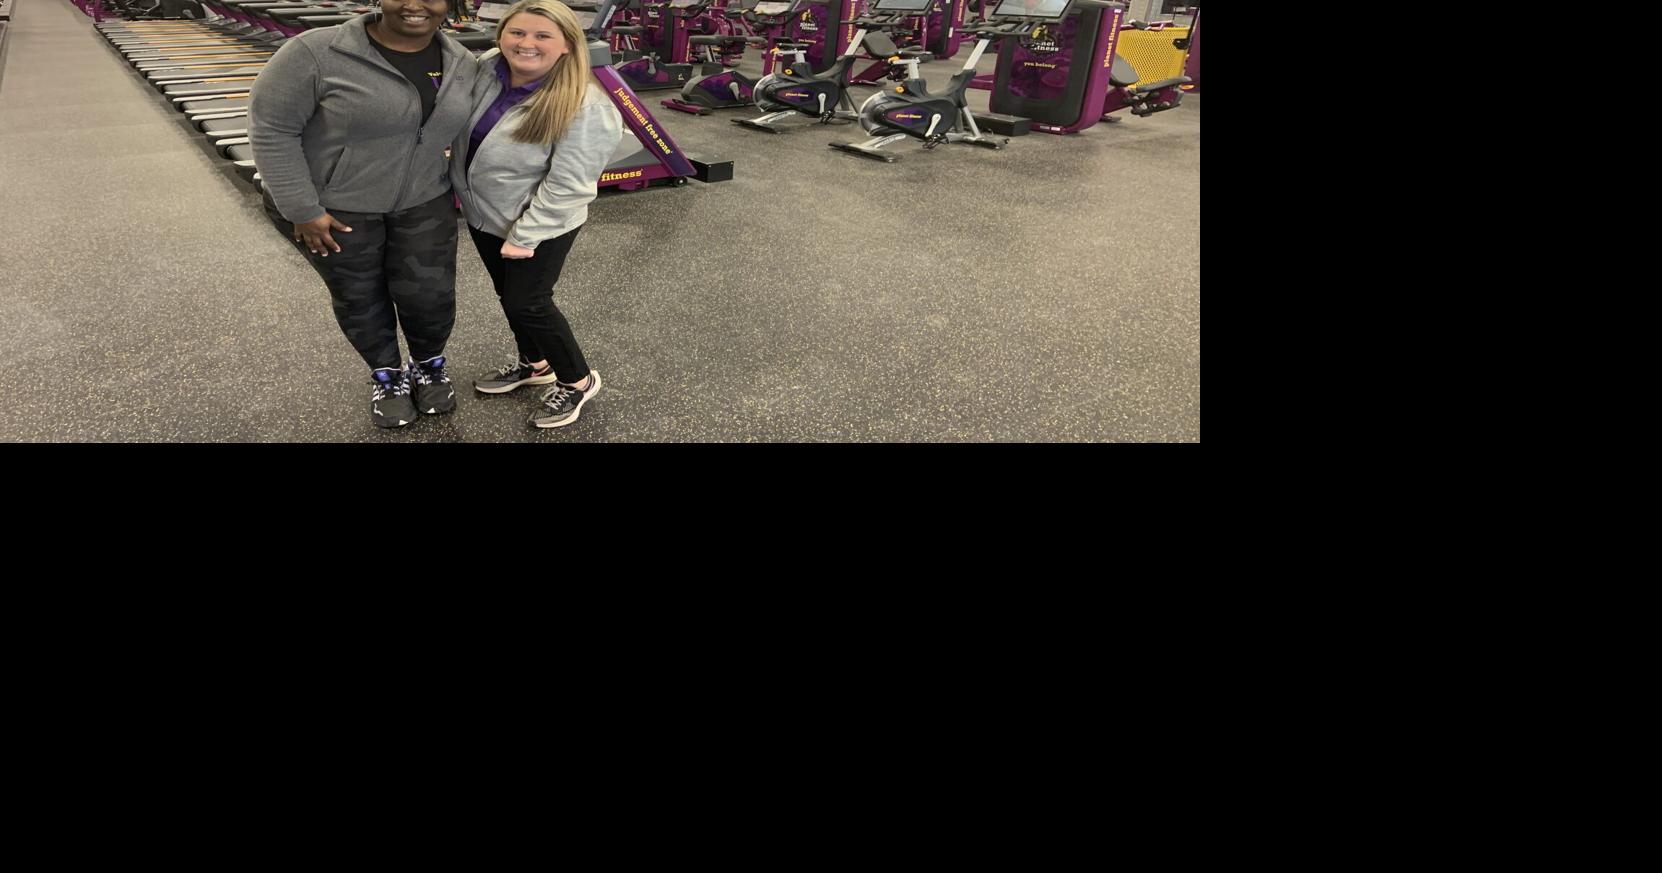 Planet Fitness - IL Horan Group